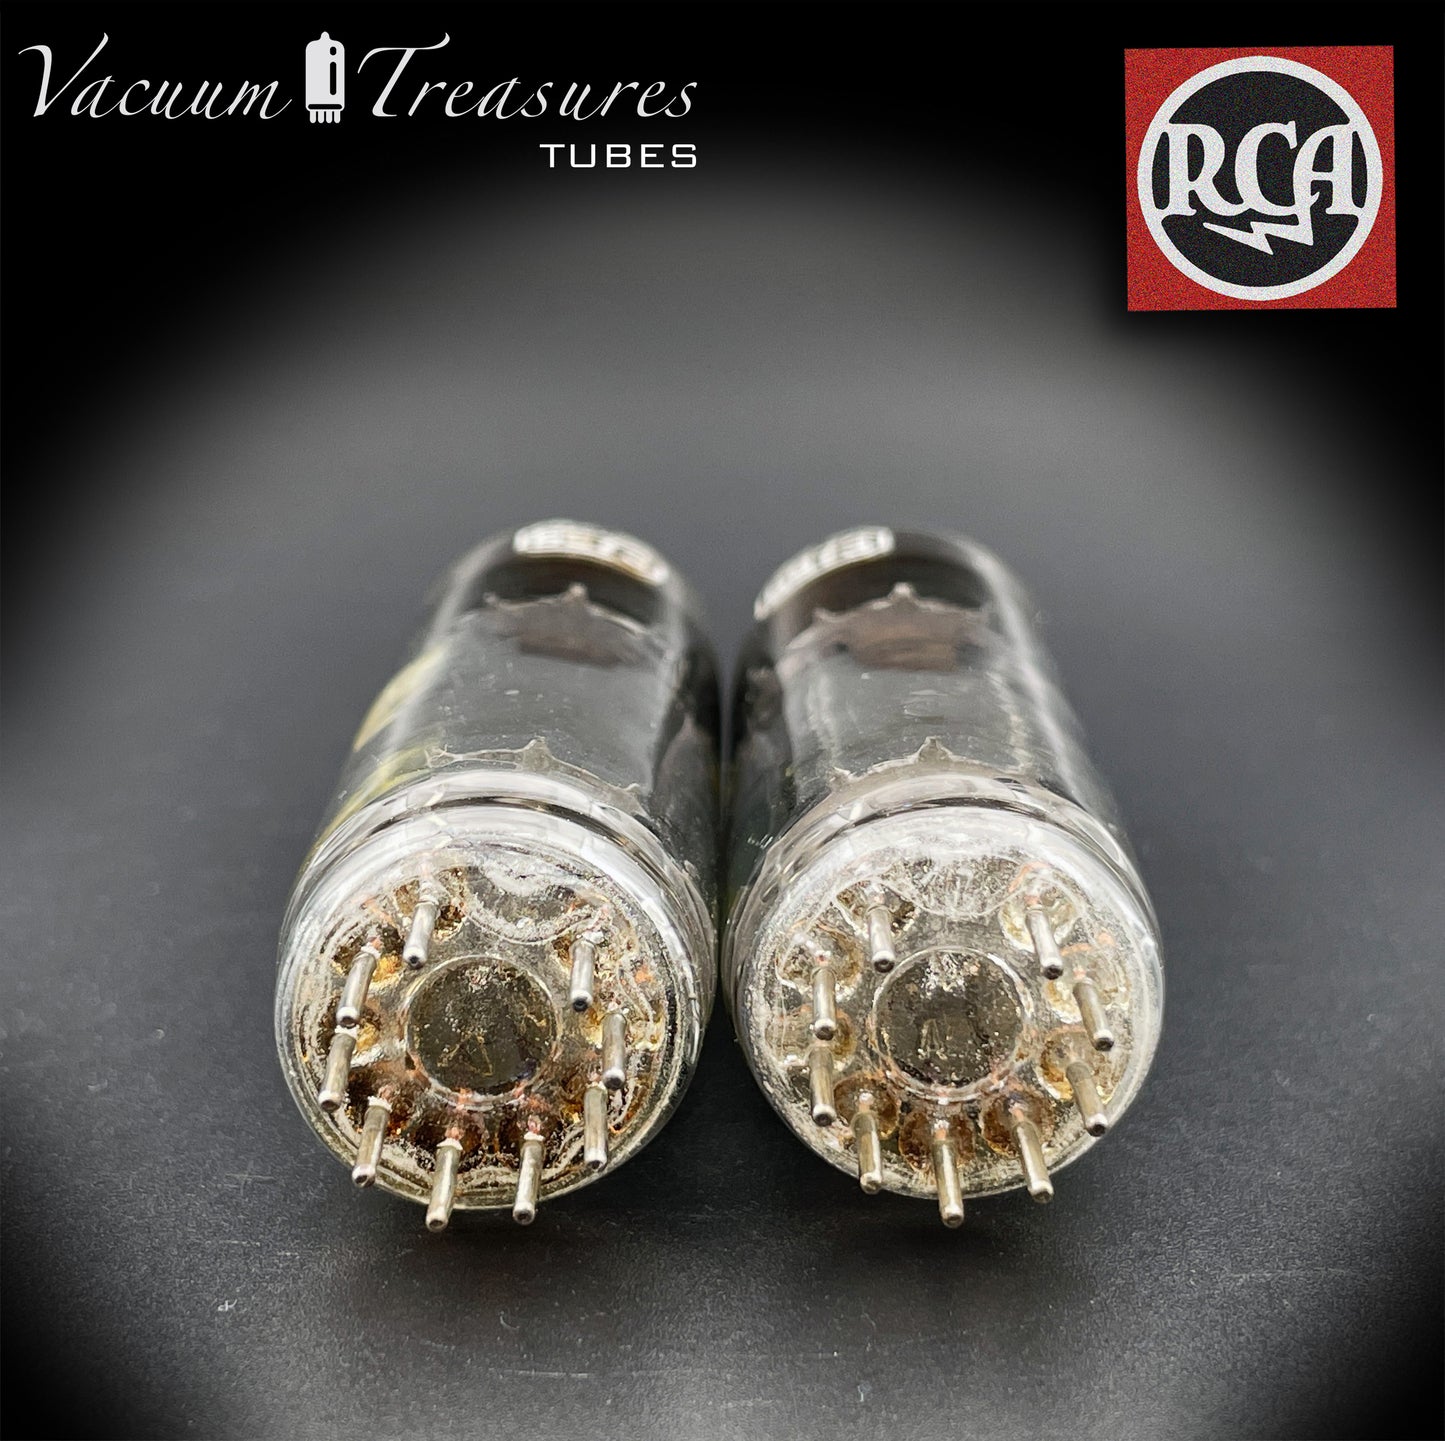 6973 RCA Black Plates Halo Getter Matched Pair Tubes Made in USA